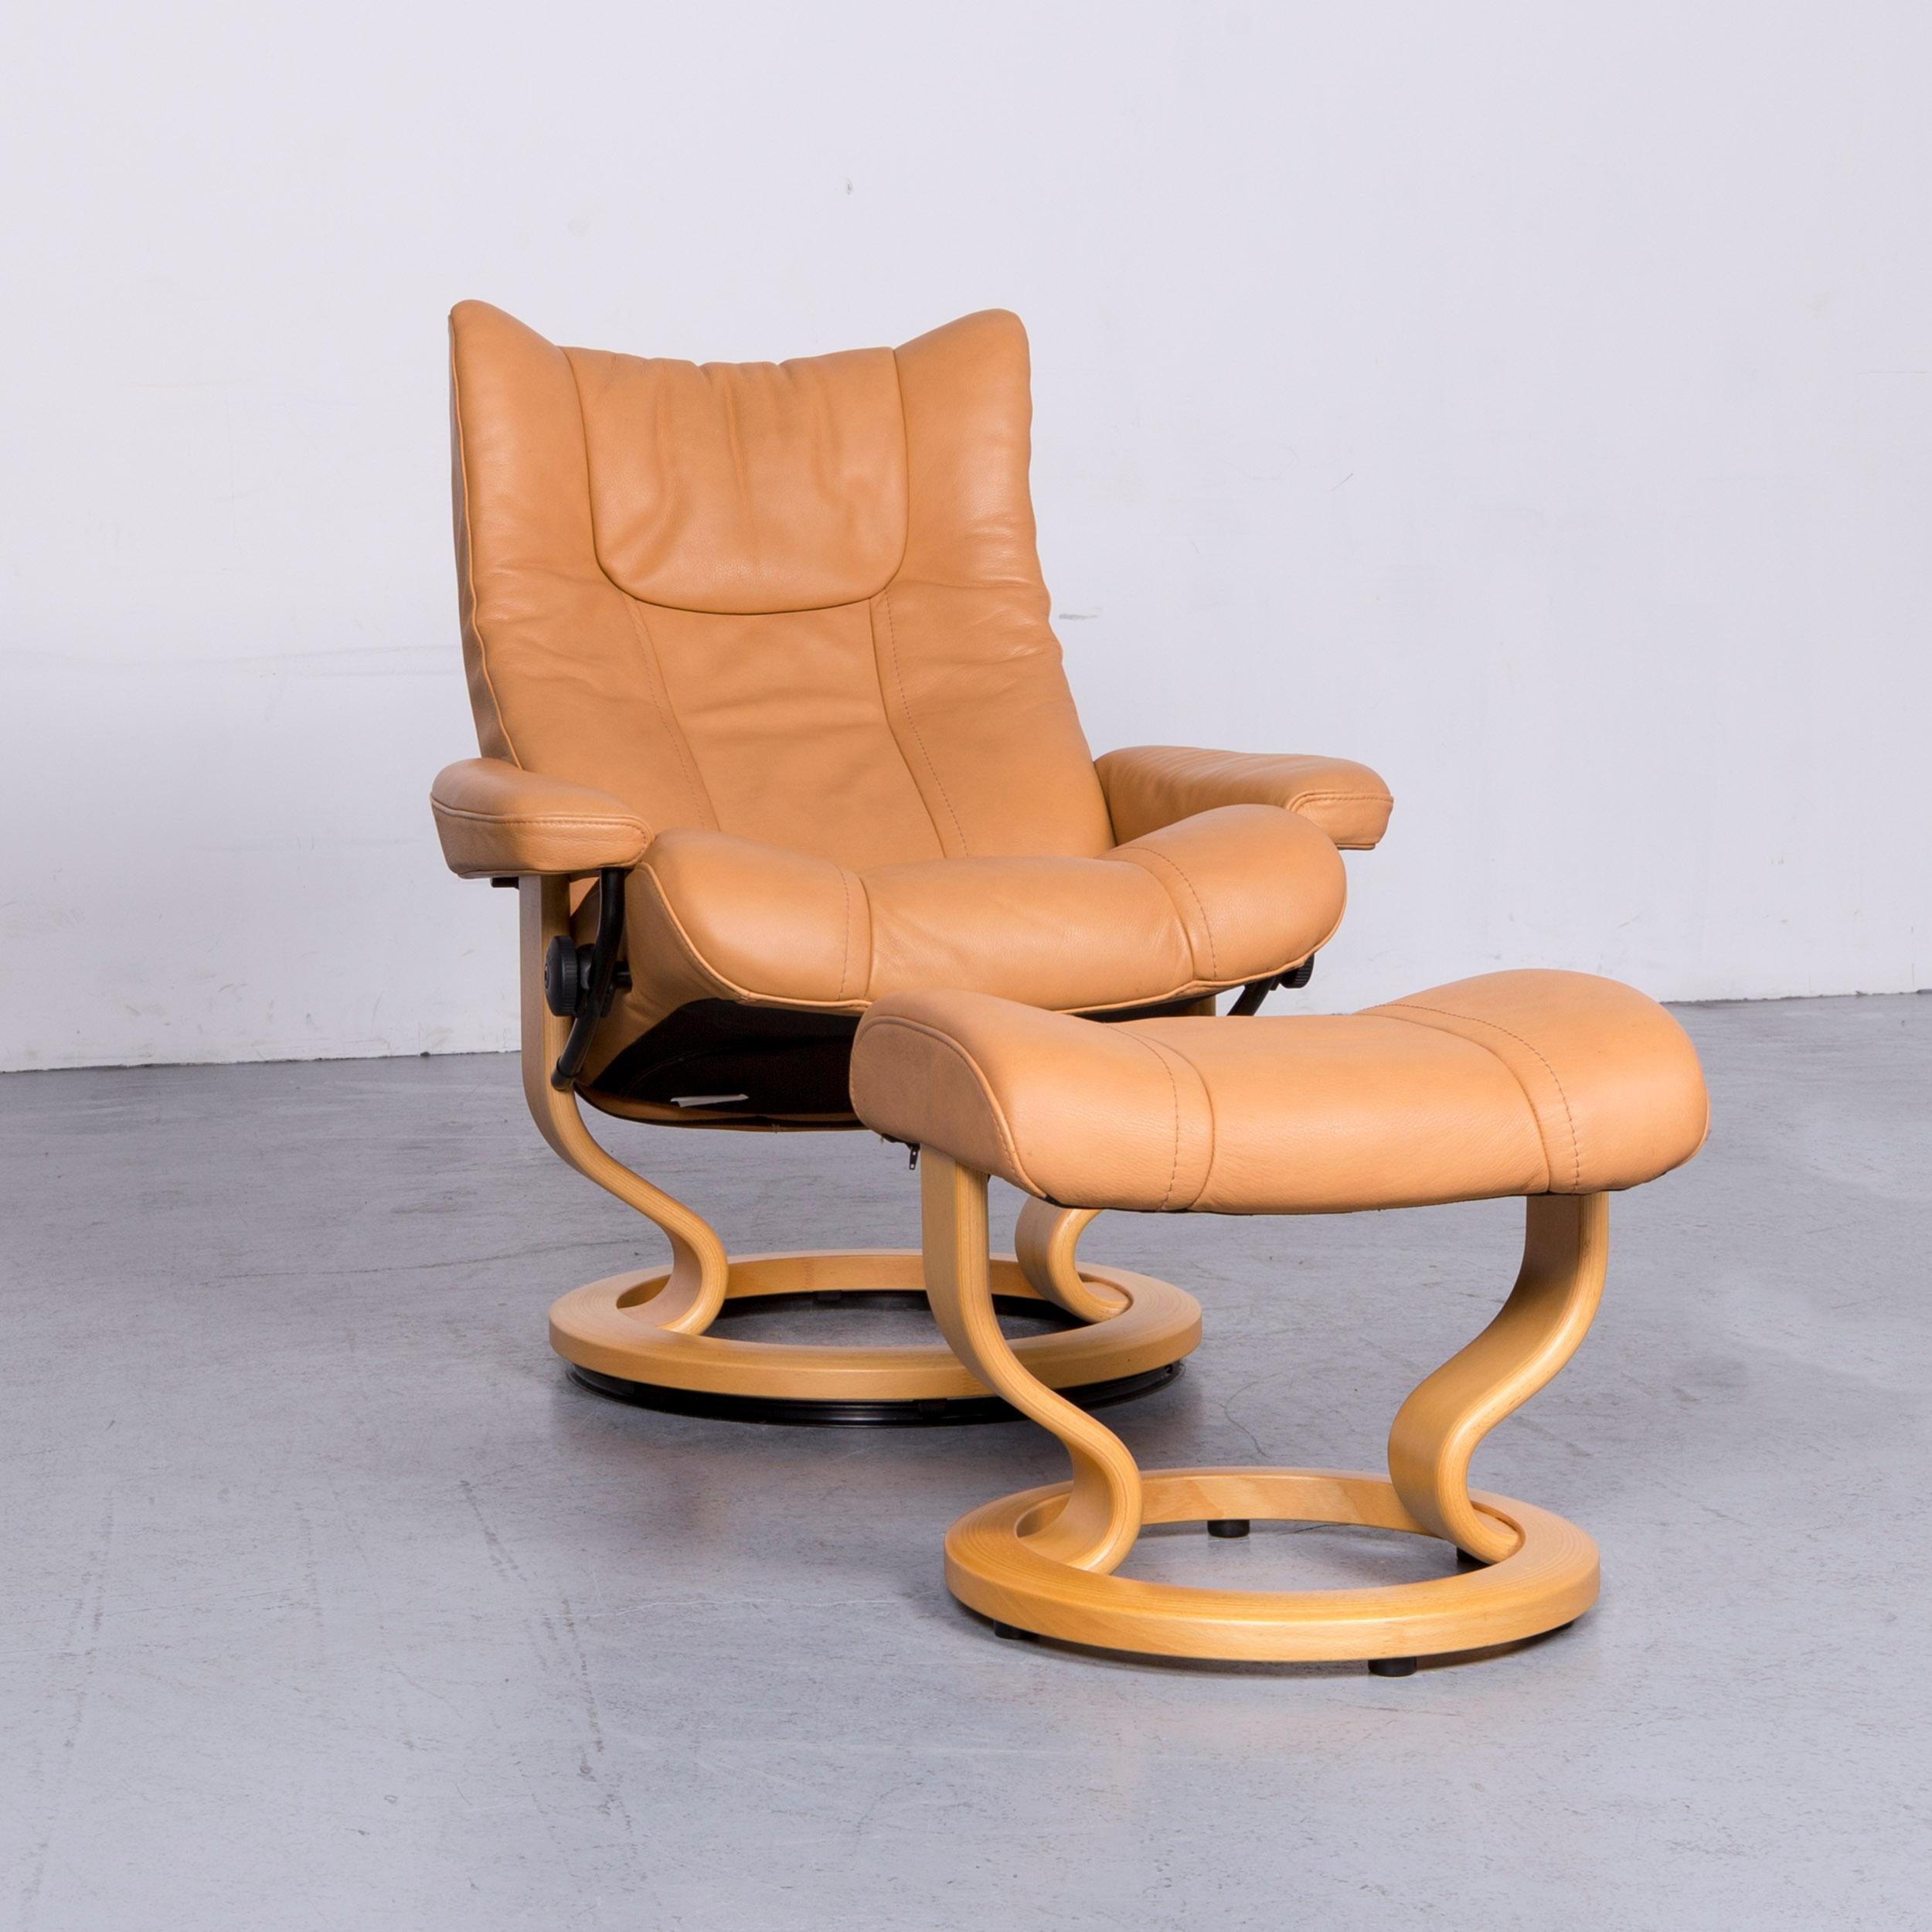 We bring to you an Ekornes Stressless wing armchair and footstool beige leather recliner chair.